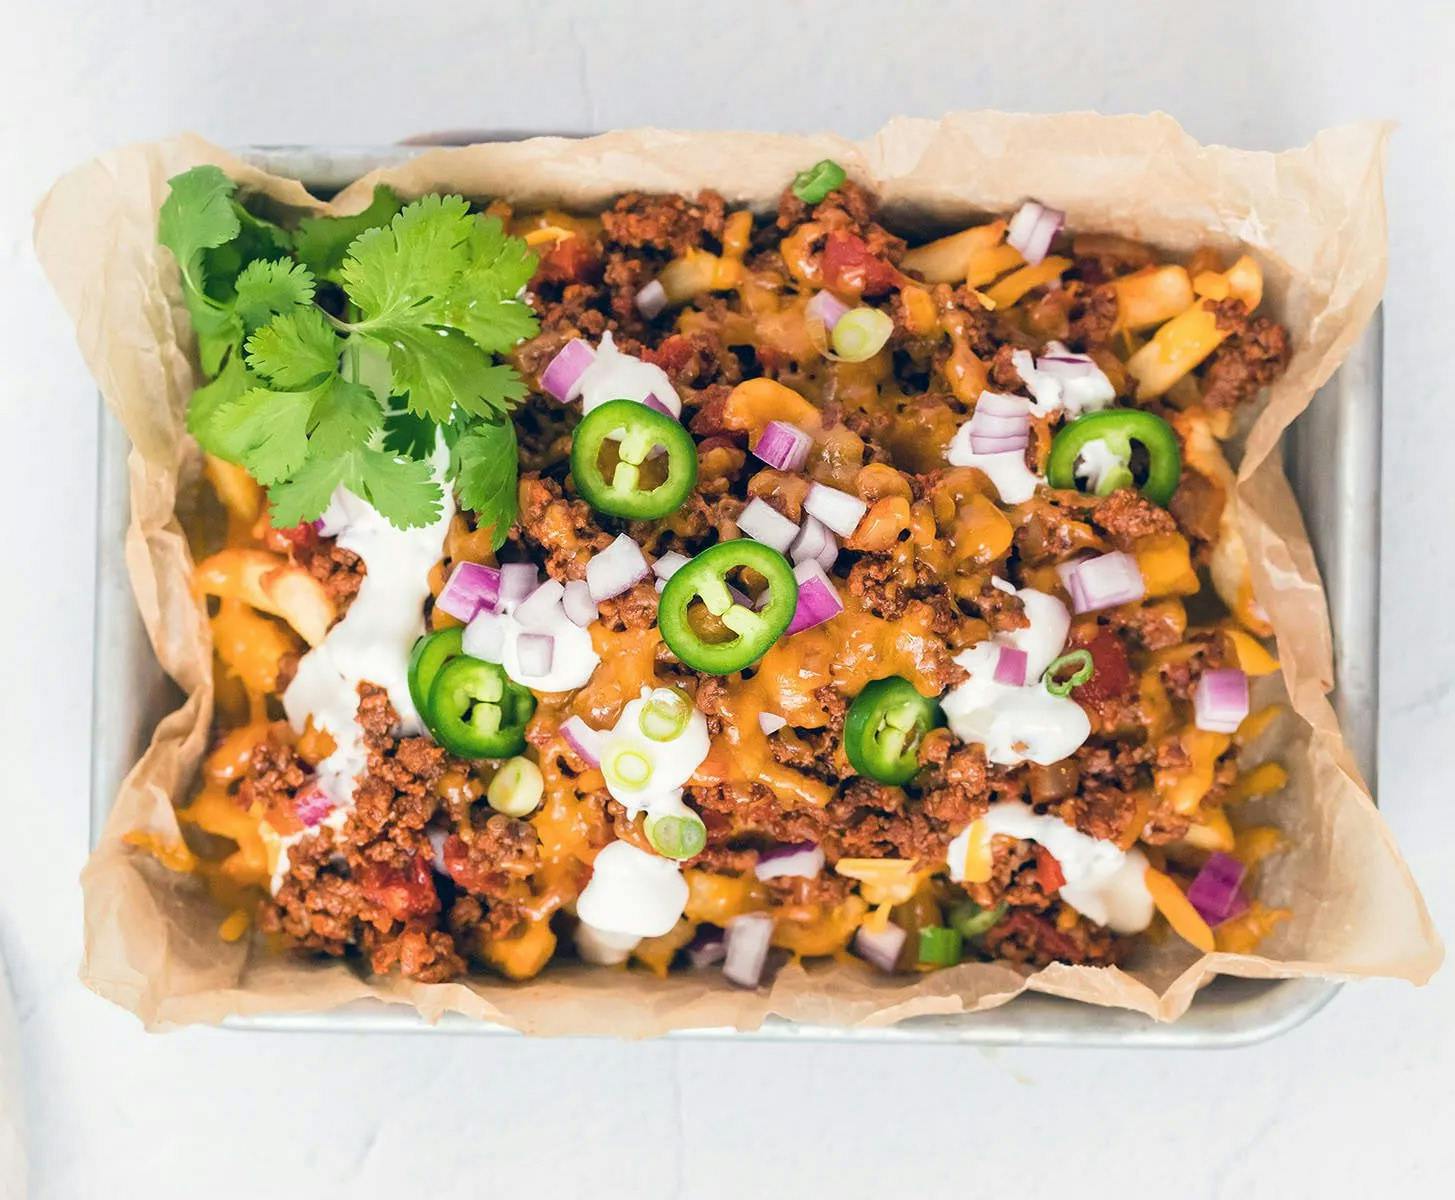 Loaded Chili Cheese Fries recipe! Crispy French fries are topped with homemade or canned chili, cheese and your favorite french fry toppings. 